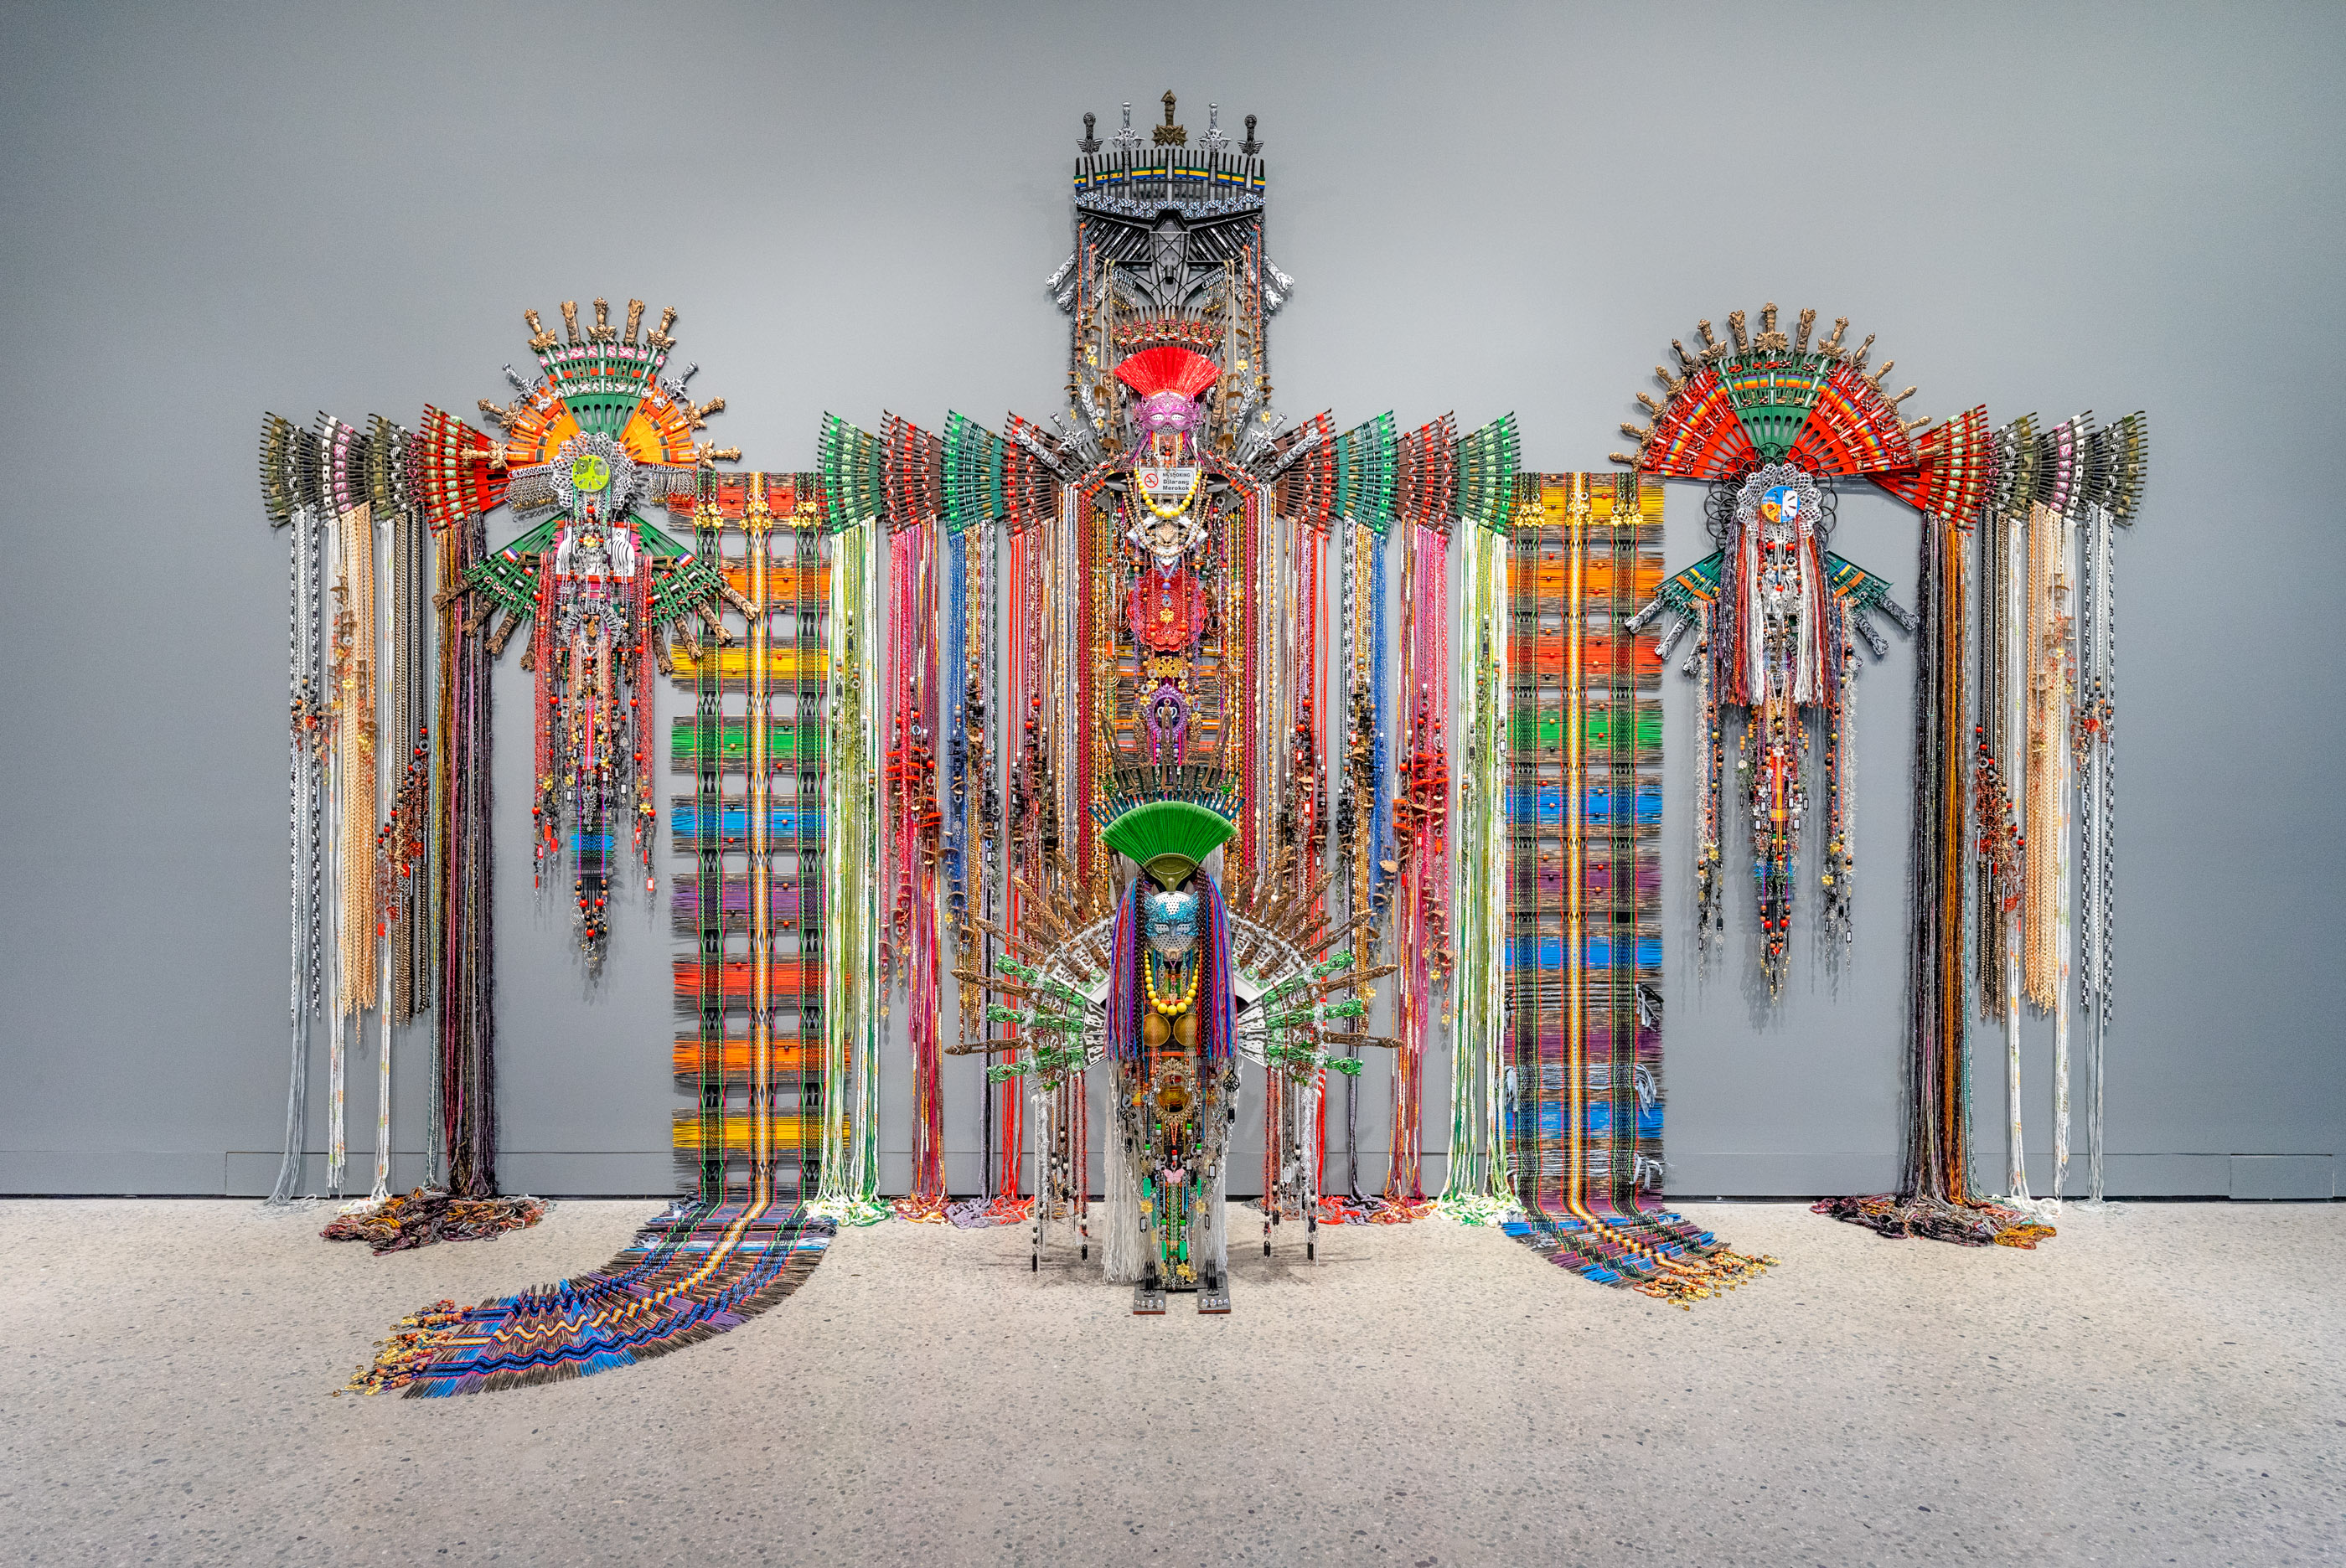 Anne Samat, “Never Walk In Anyone's Shadow”, 2023. Rattan sticks, kitchen and garden utensils, beads, ceramic, metal and plastic ornaments, 365.75 x 731.5 x 25.5 cm. Photo by Brian Holcombe. Courtesy of the Artist and MARC STRAUS.